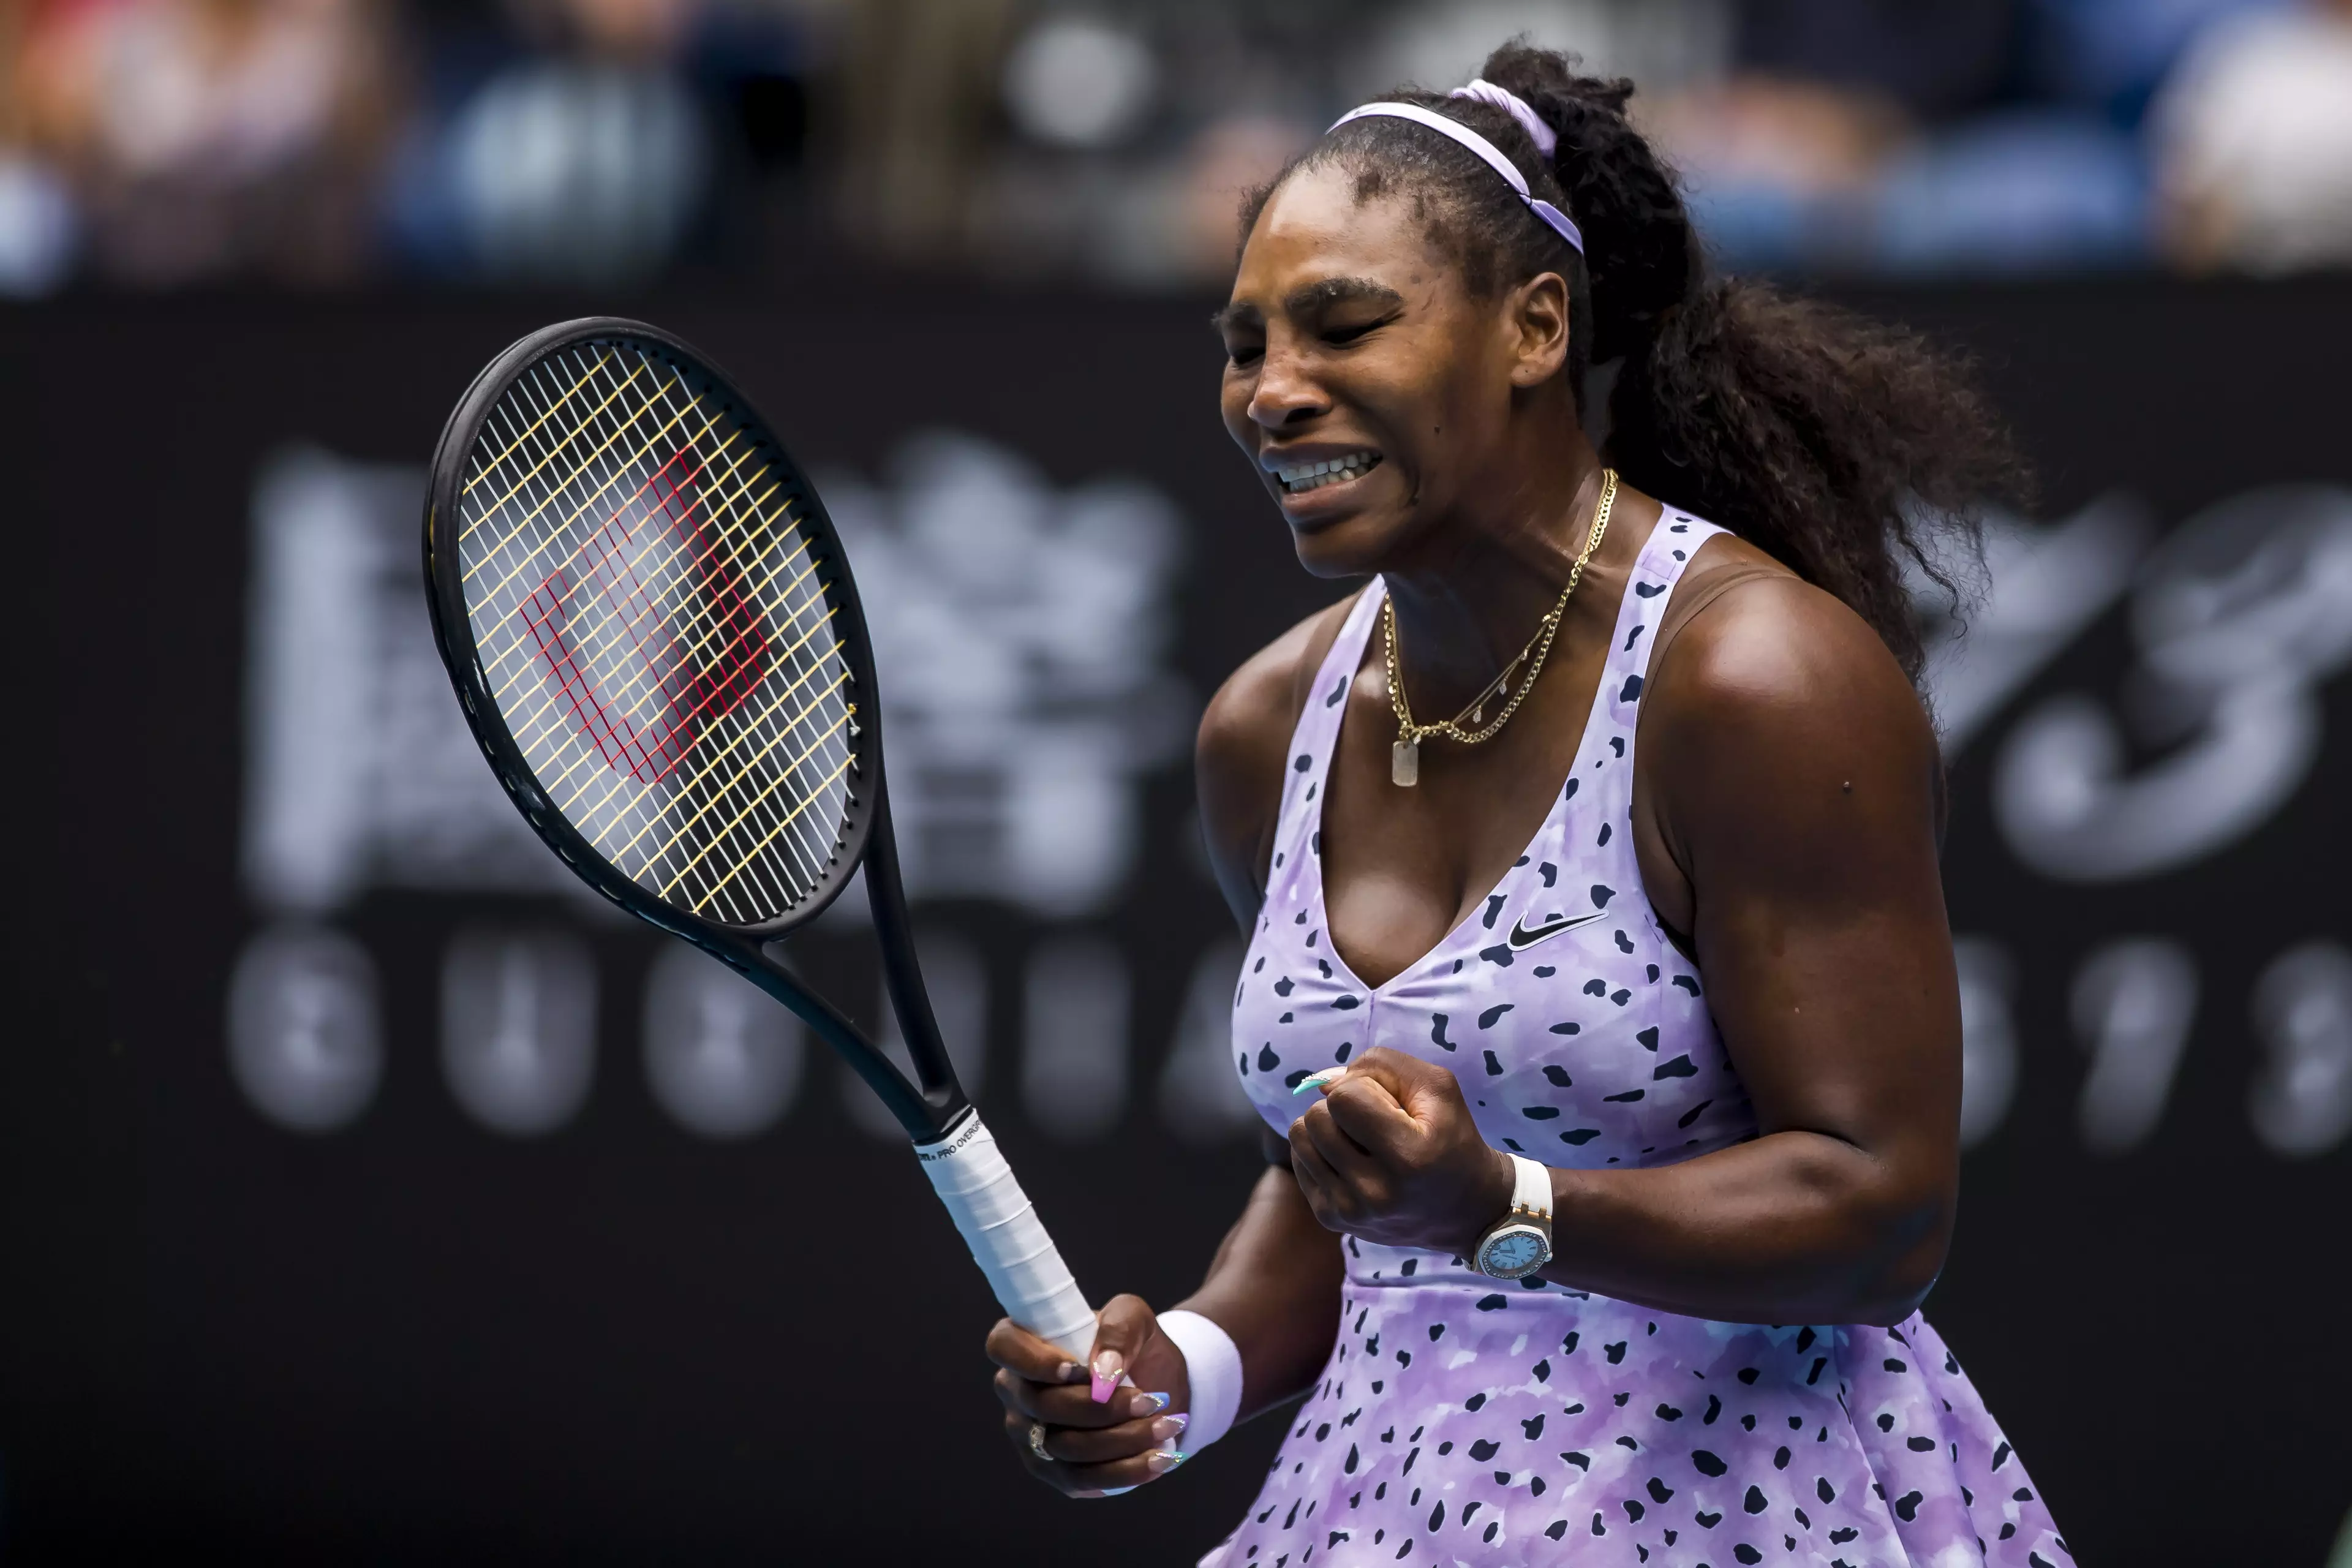 Serena Williams in action at the Australian Open in January of 2020.